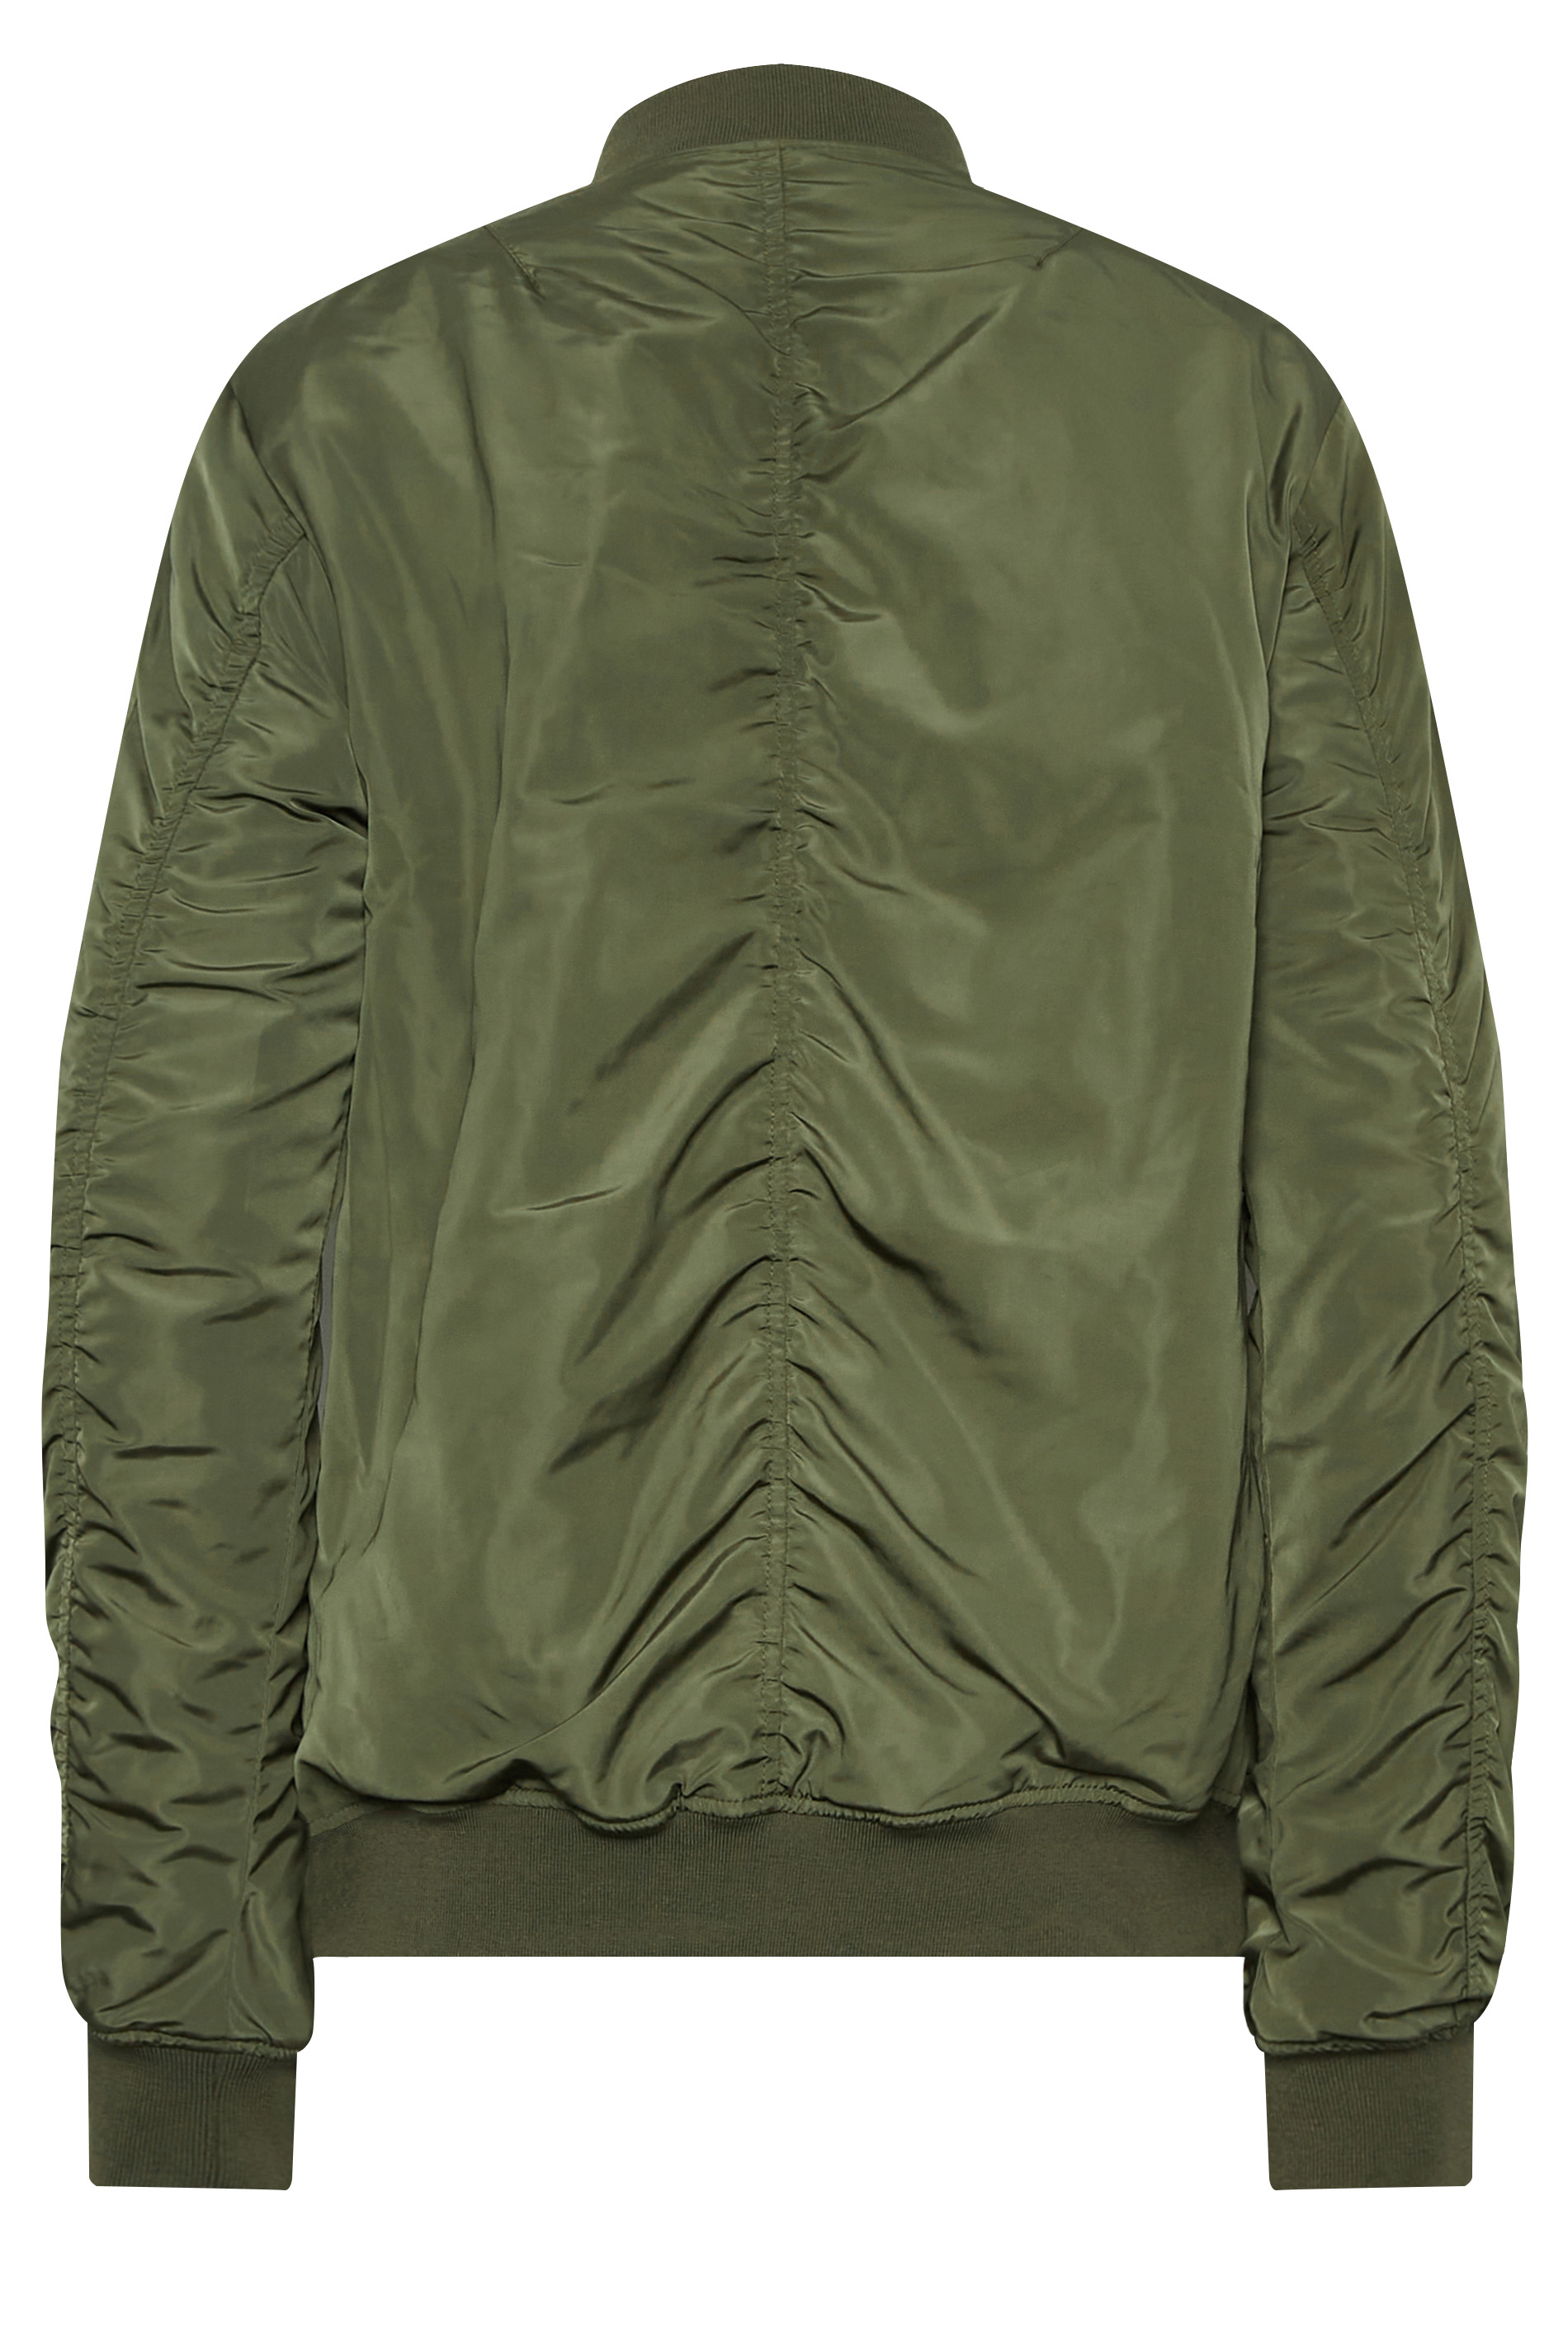 Buy Long Tall Sally Green Camo Utility Jacket from the Next UK